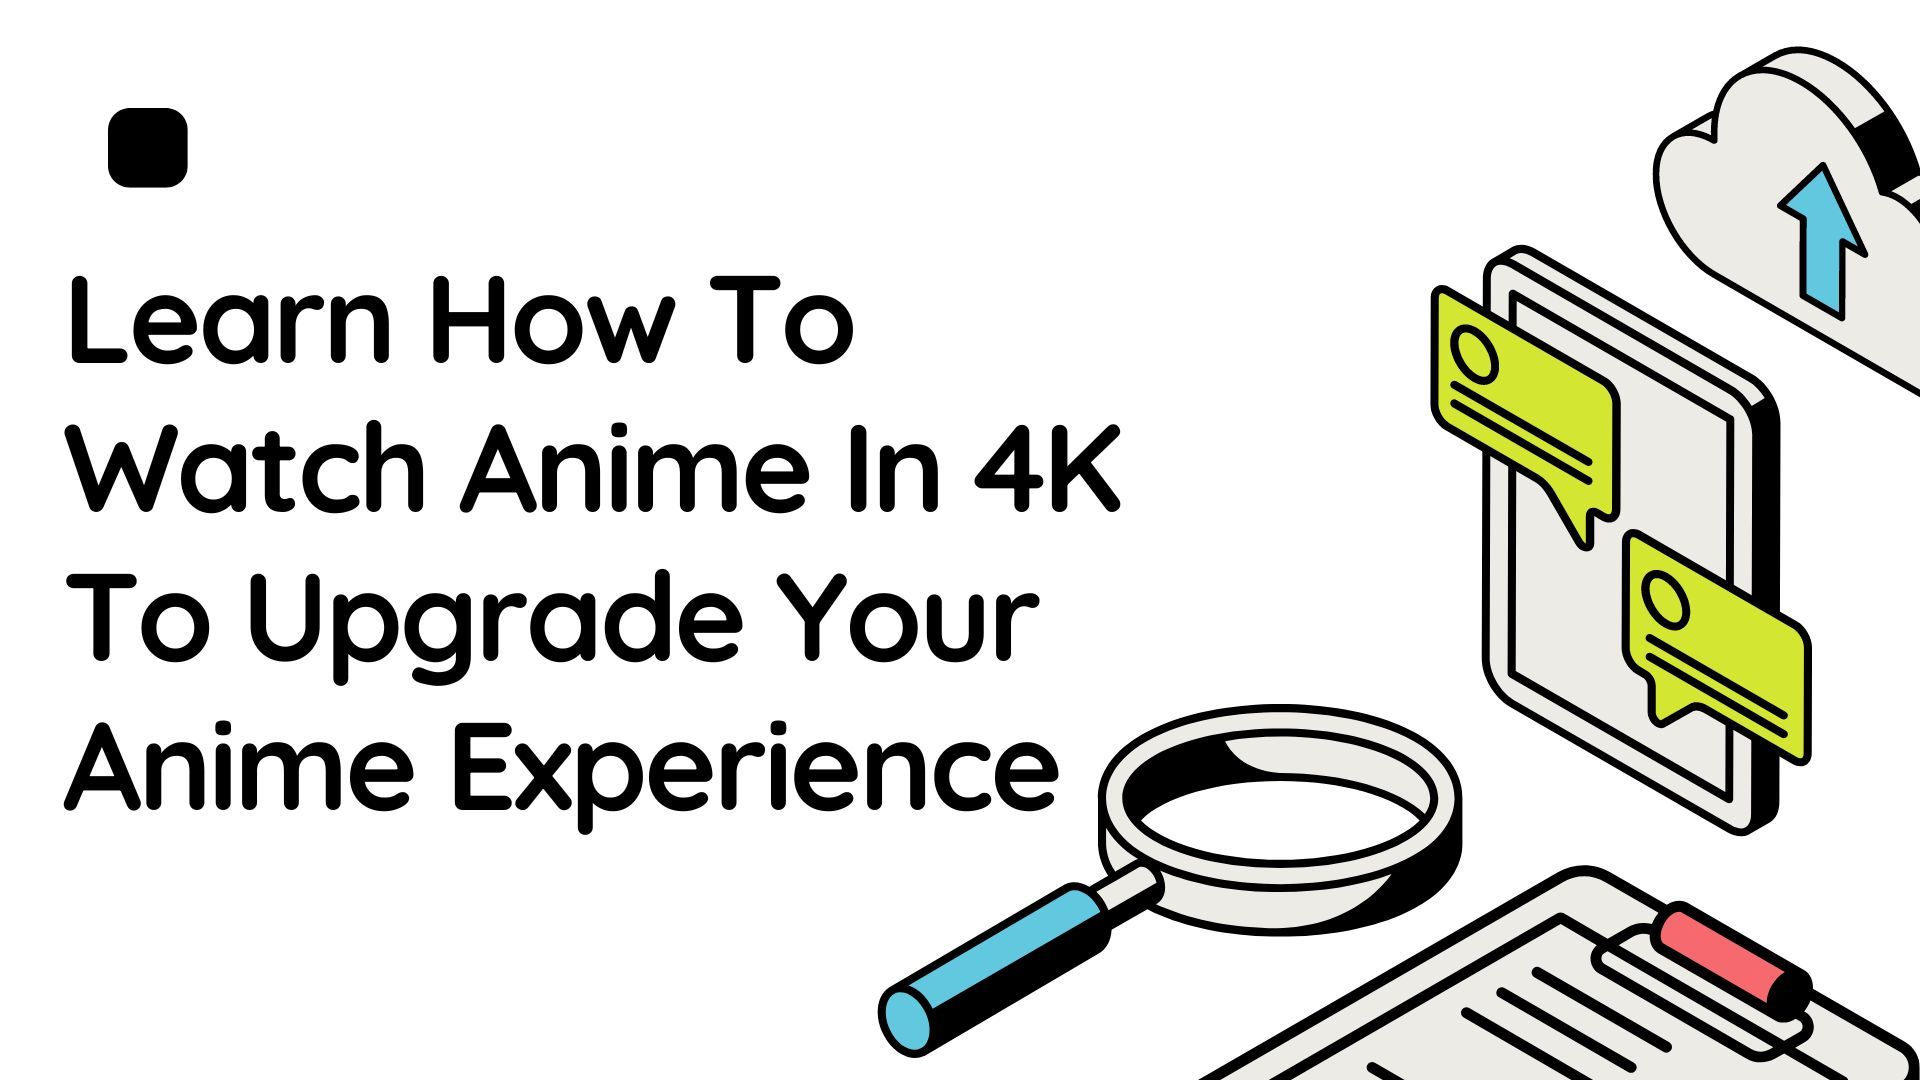 How To Watch Anime In 4K To Upgrade Your Anime Experience